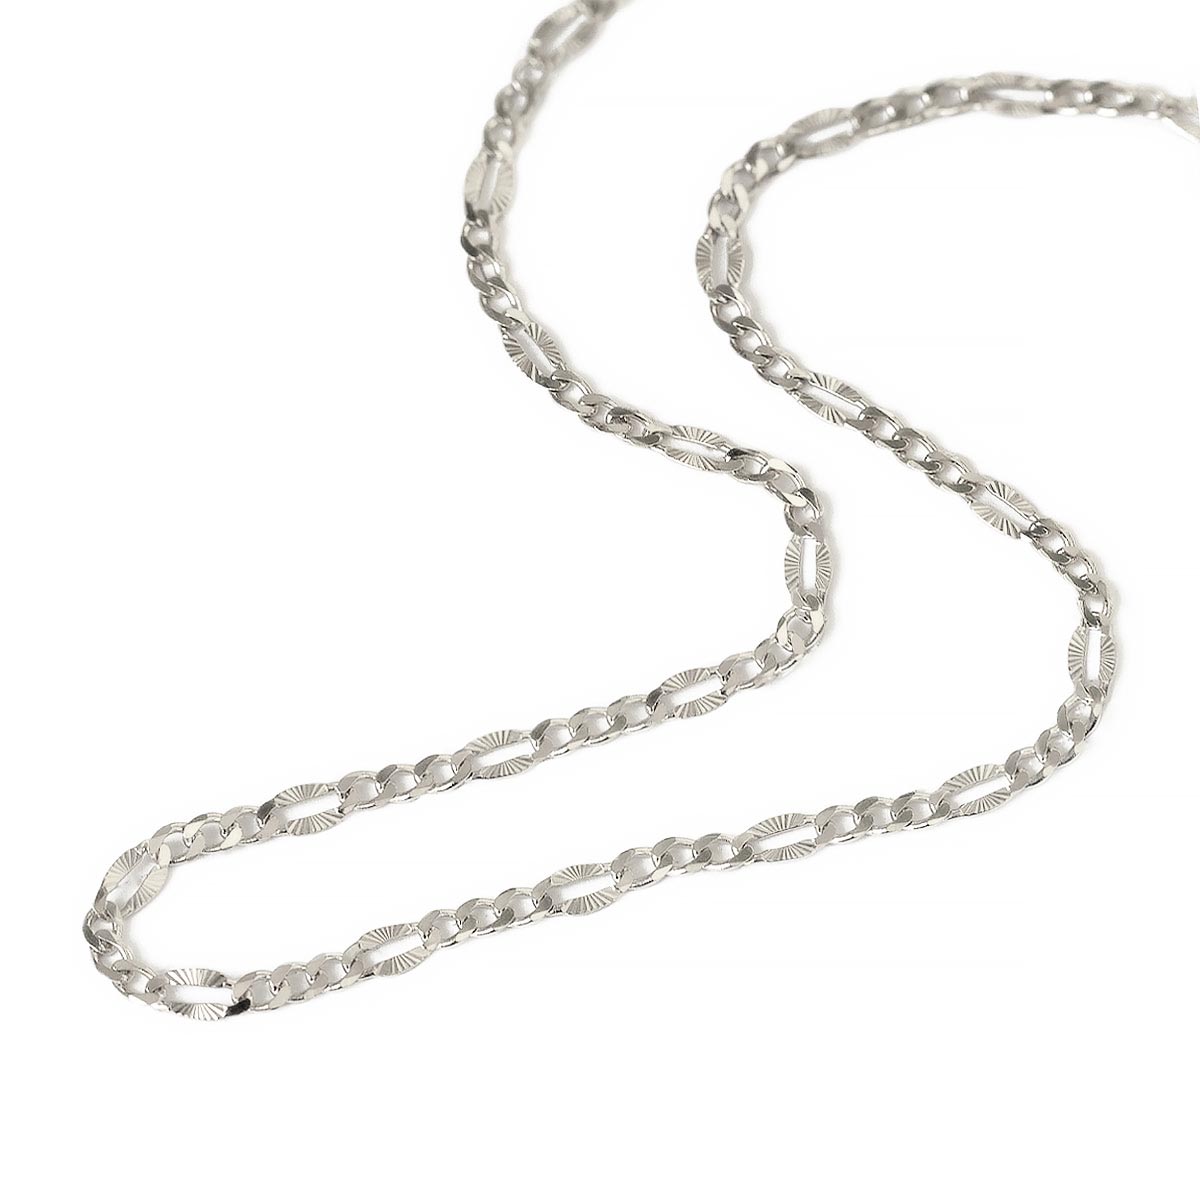  NIMOCO 925 Sterling Silver Chain Necklace for Women